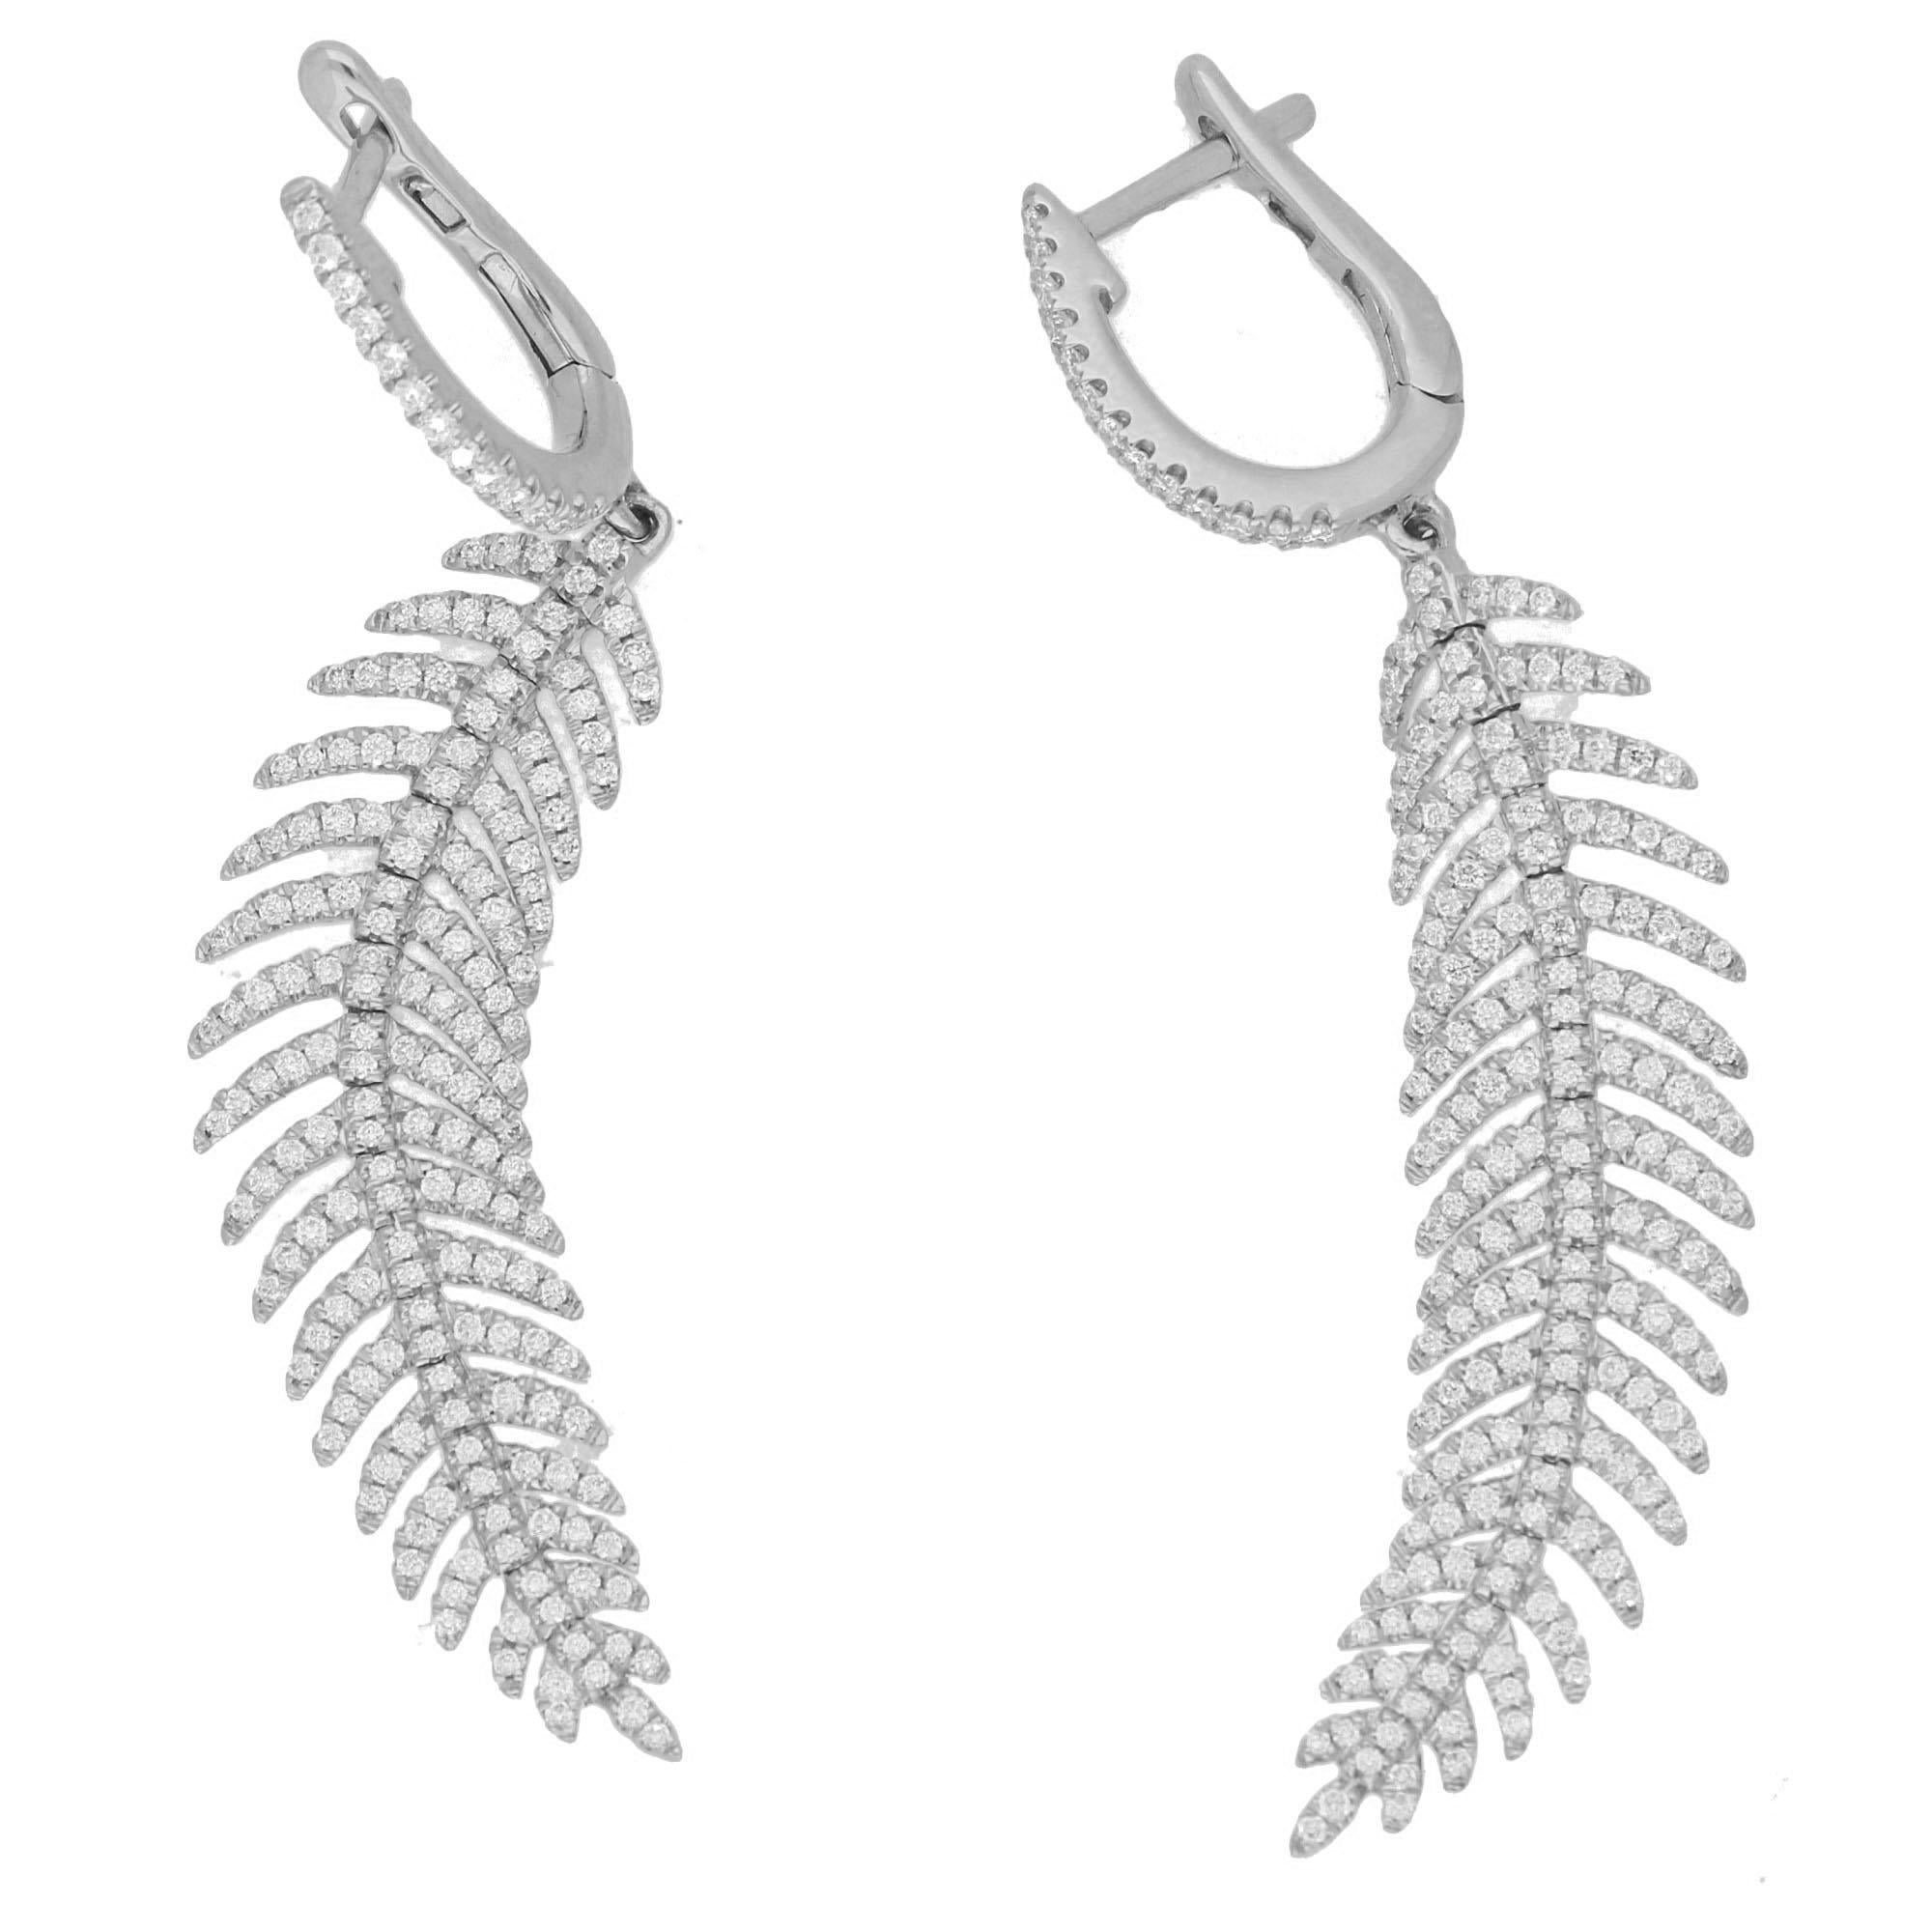 A gorgeous pair of articulated feather diamond drop earrings set in 18k white gold. 

Each earring depicts a beautiful feather which is articulated and claw-set throughout with round brilliant-cut diamonds. Each feather hangs elegantly from a